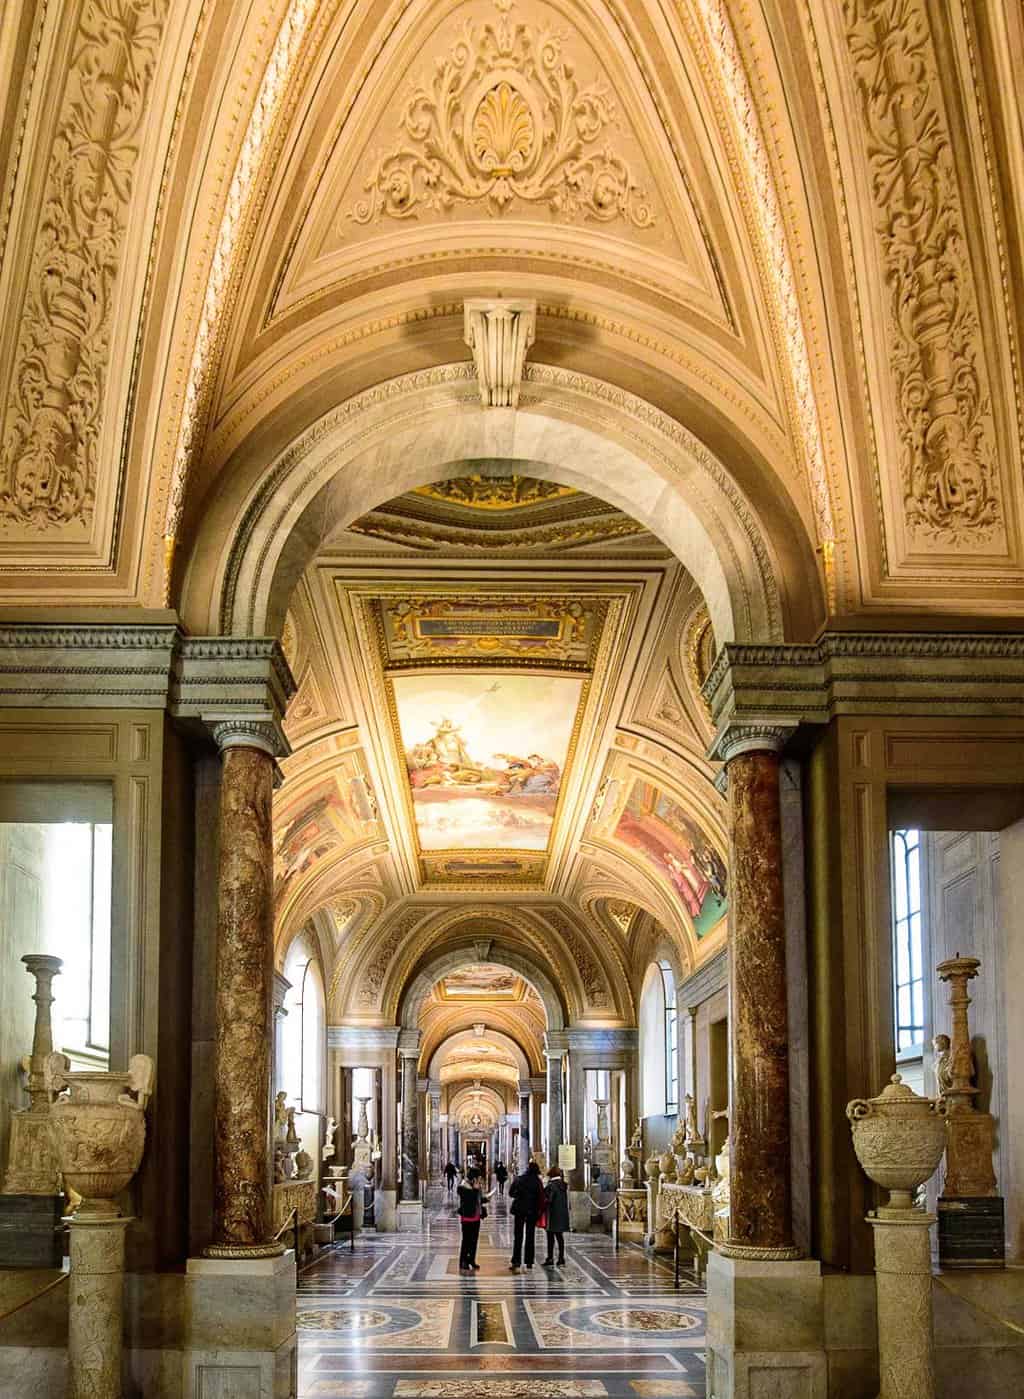 People walking down the ornate halls of the Vatican Museums.